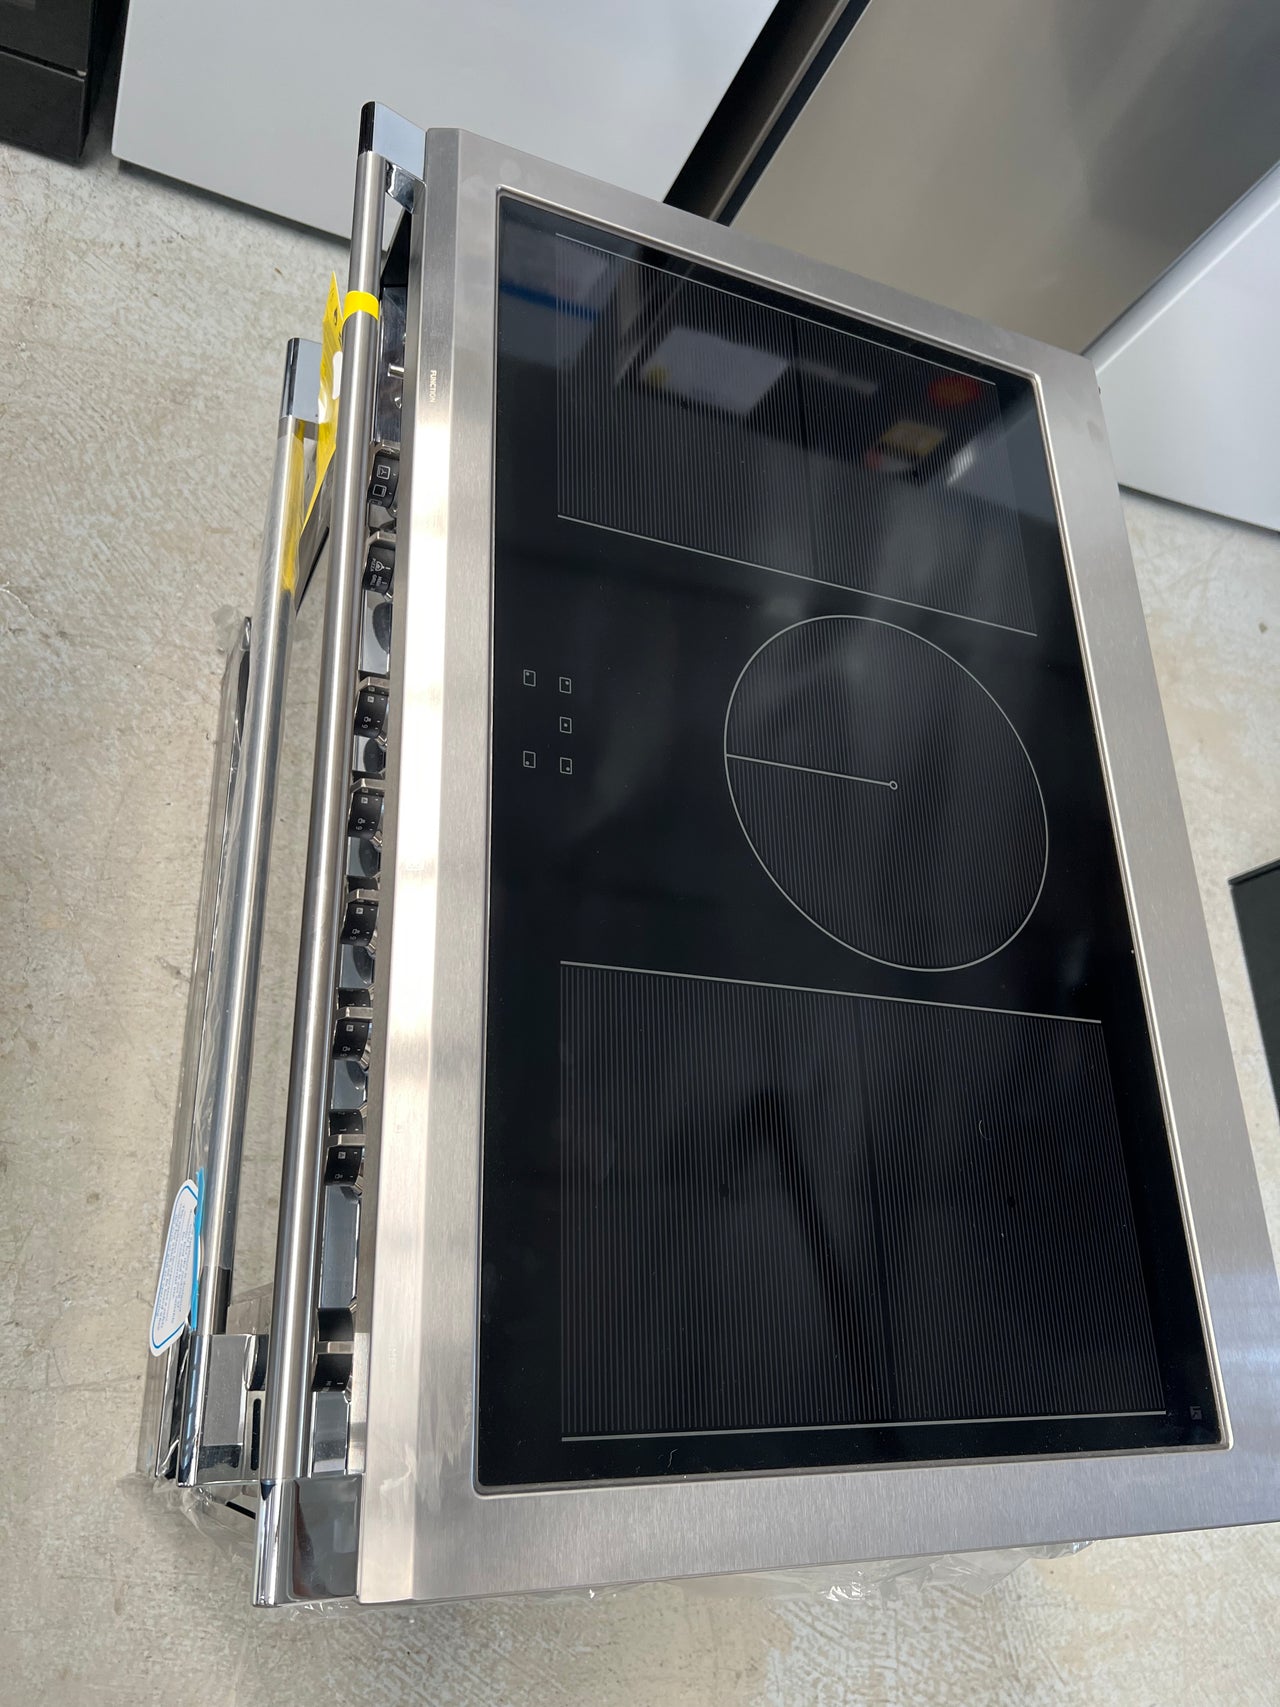 Factory second FISHER & PAYKEL 90CM FREESTANDING ELECTRIC PYROLYTIC OVEN/STOVE OR90SCI6B1 - Second Hand Appliances Geebung